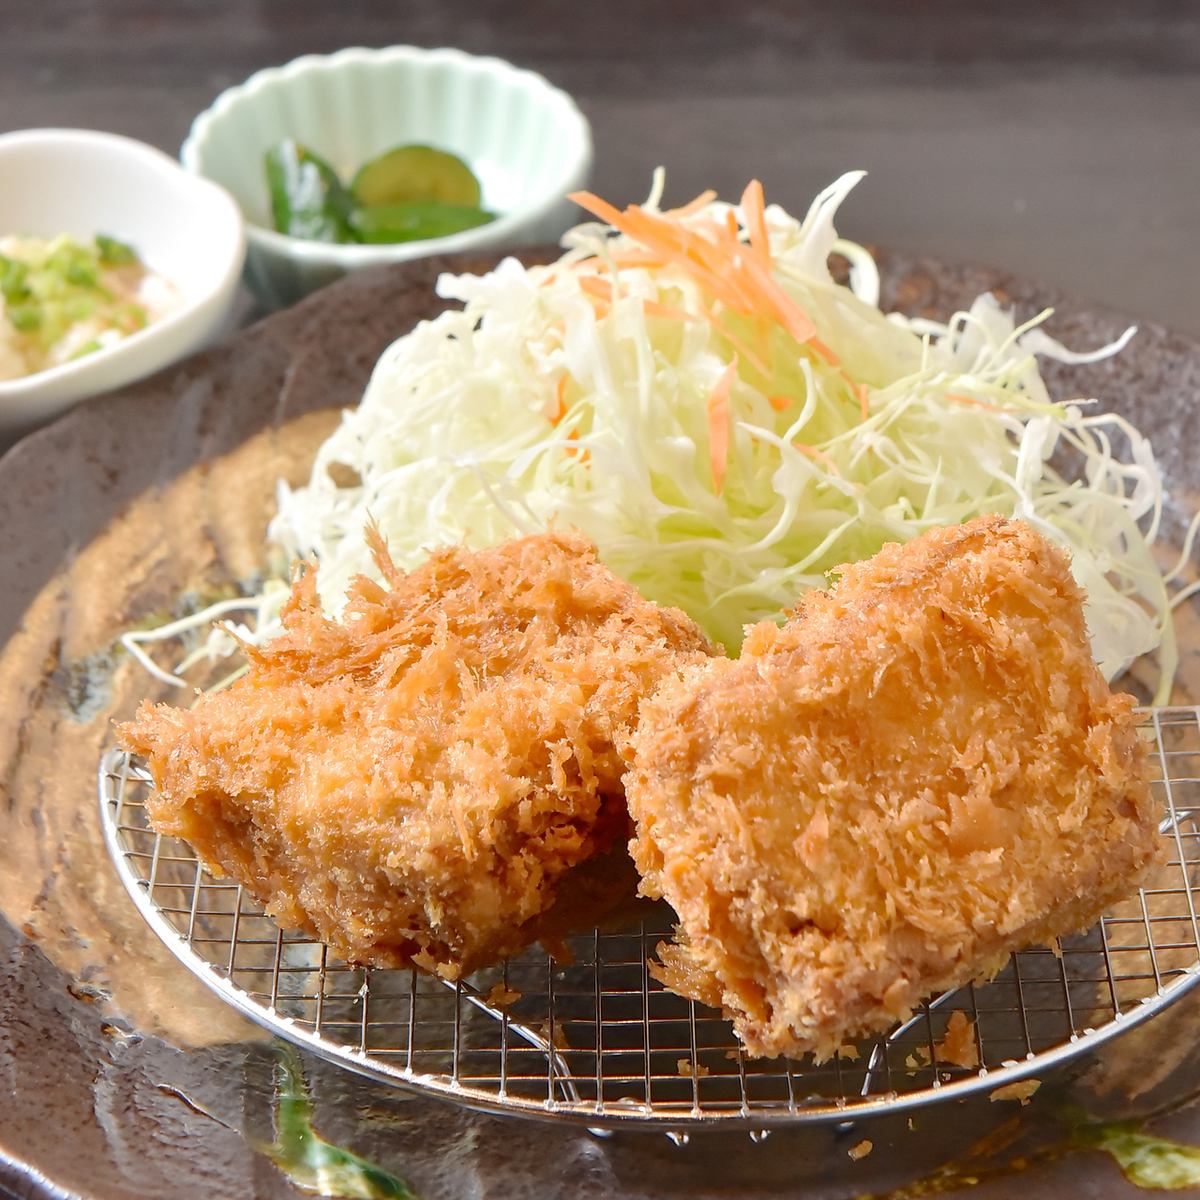 Exquisite tonkatsu that is soft enough to be cut with chopsticks!